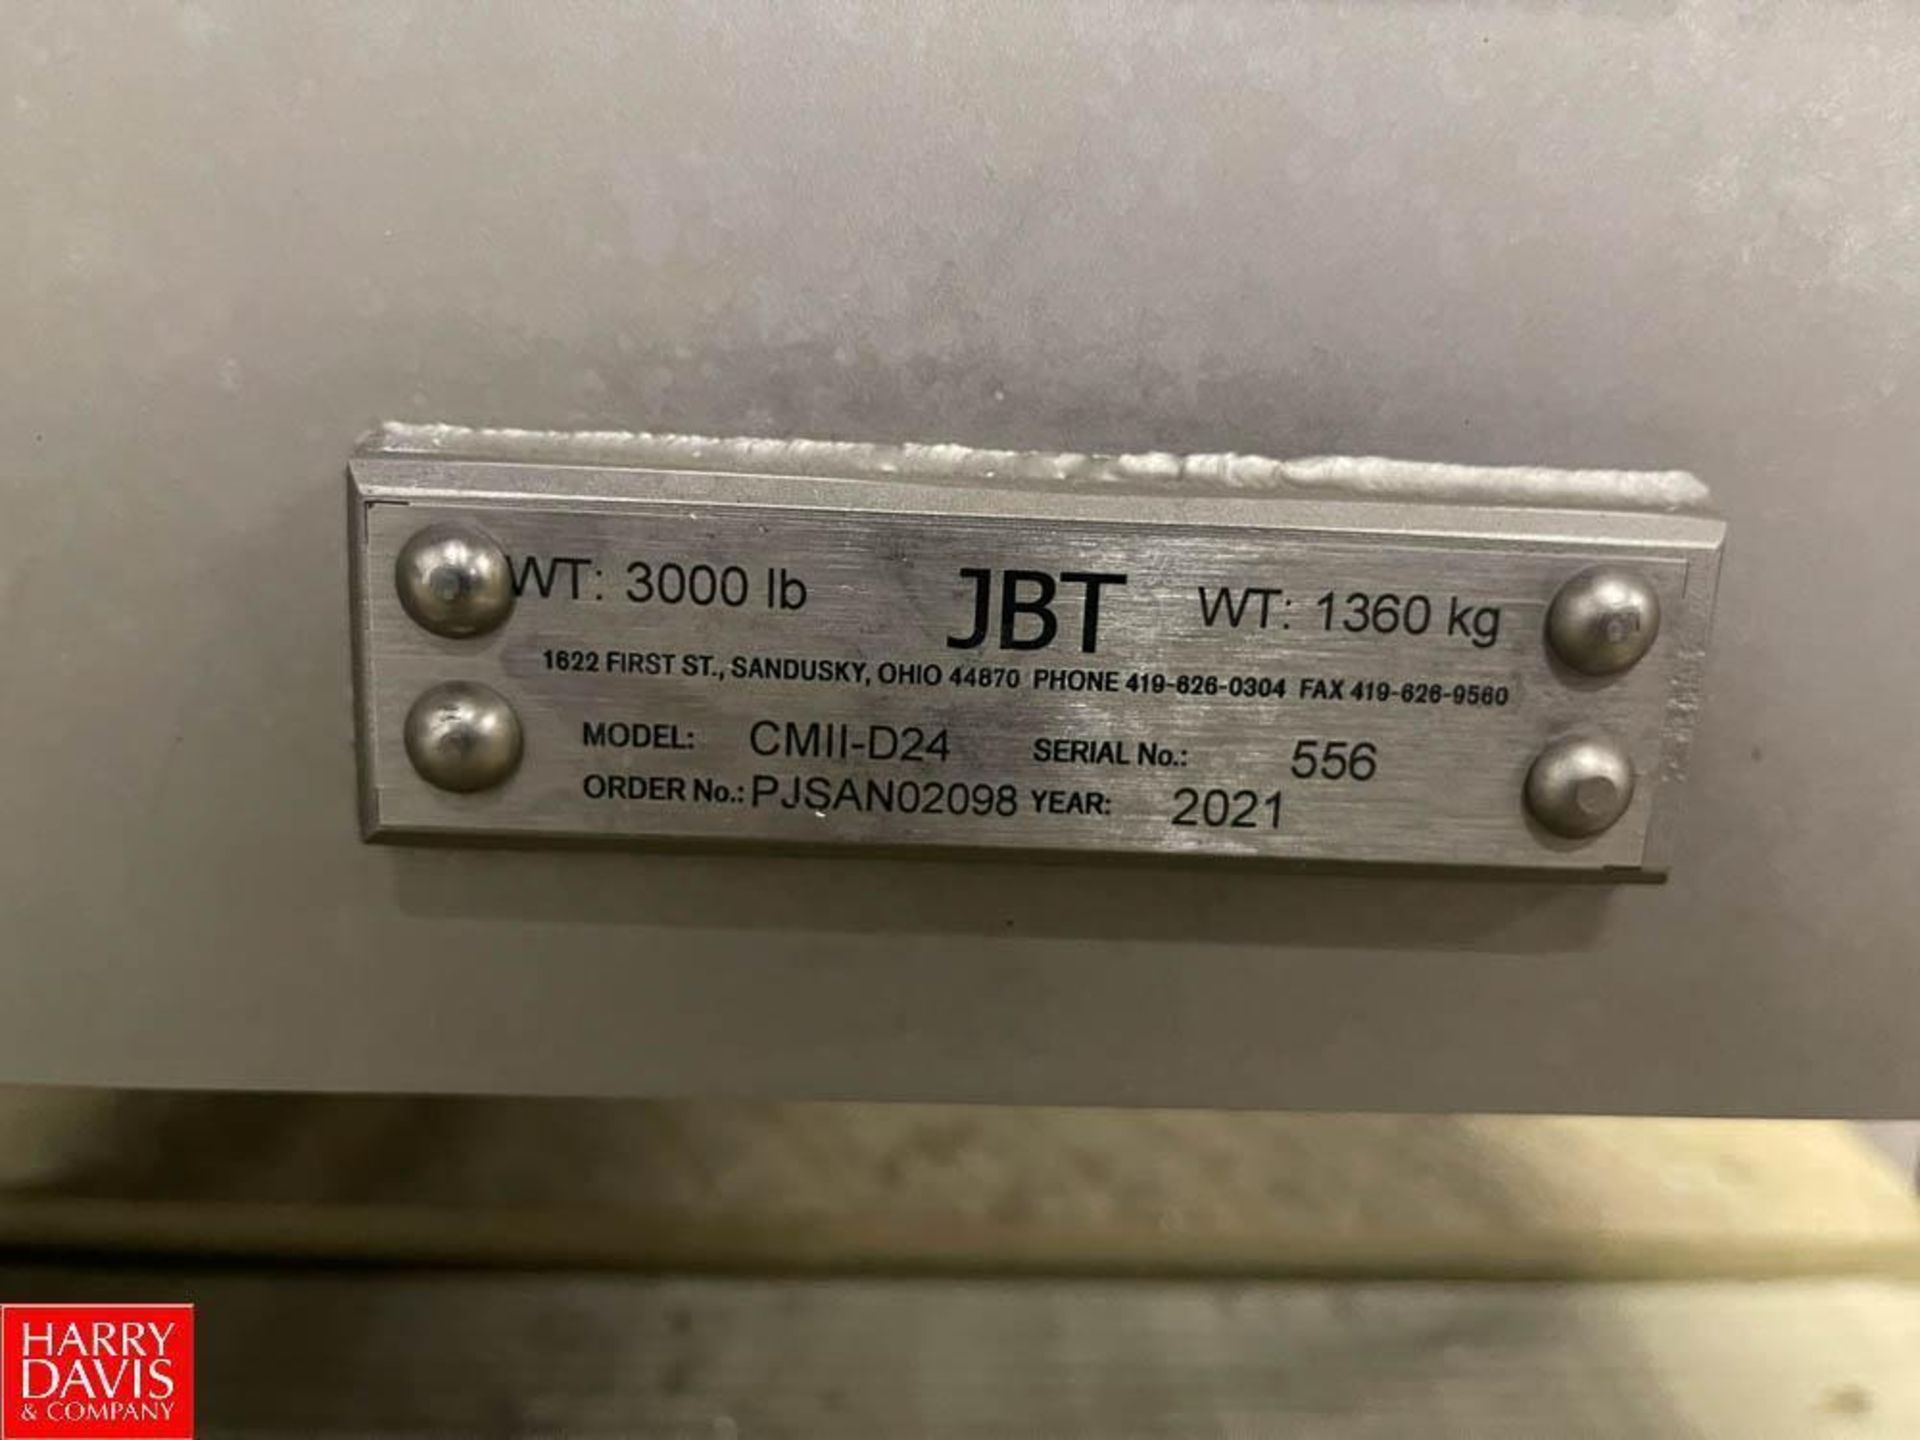 2021 JBT Char Marker, Model: CMII-D24, S/N: 556, 24" Belt Width, with Gas Mixing Valves and Spare Pa - Image 5 of 7